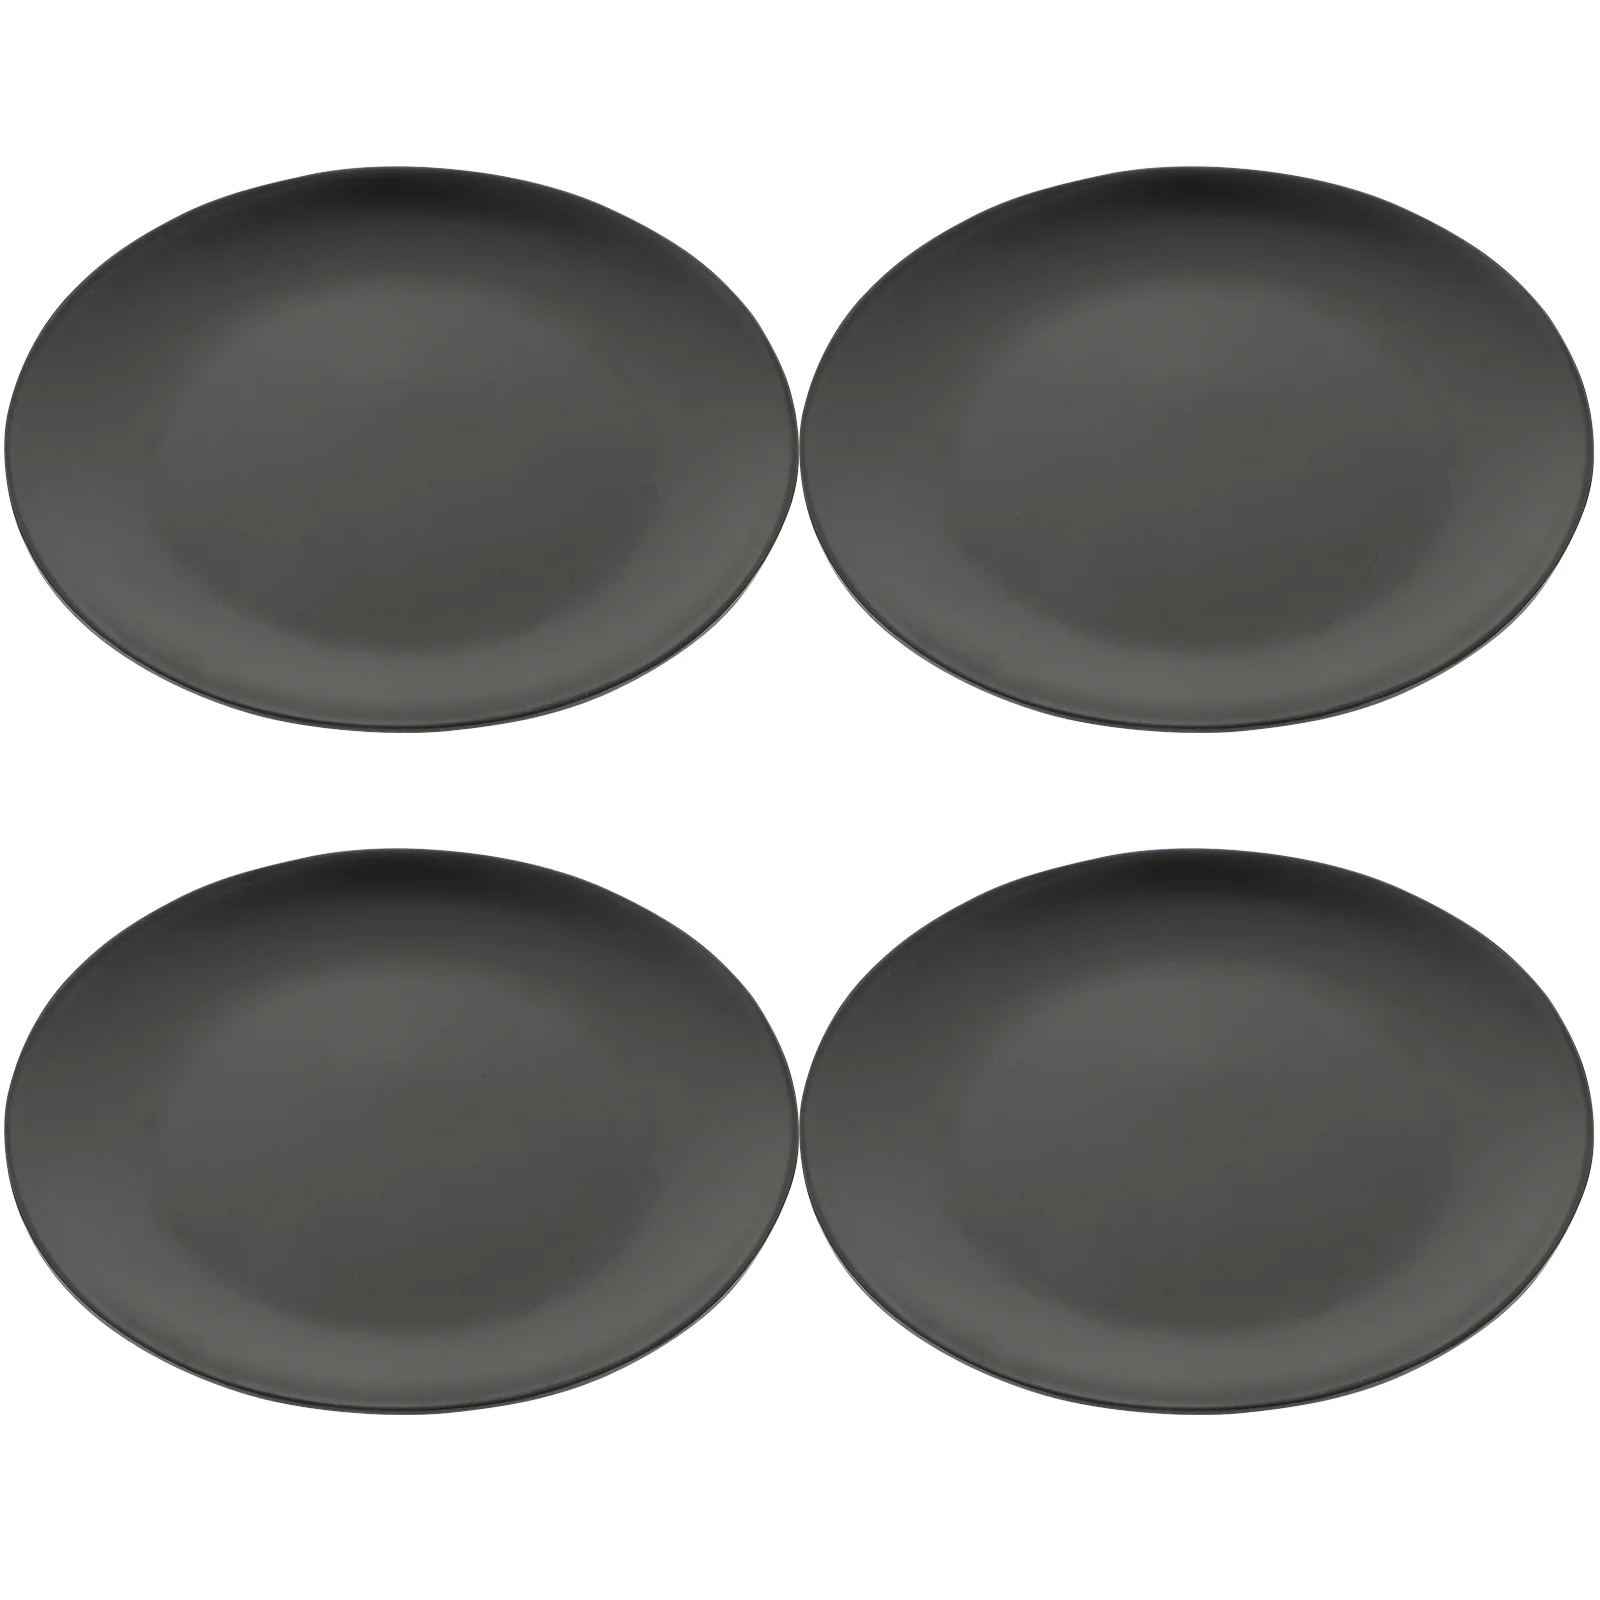 

4 Pcs Black Melamine Plate Kitchen Plates Flat Bottom Serving Dish Plastic Food Tray Candy Round Party Platter Dinner